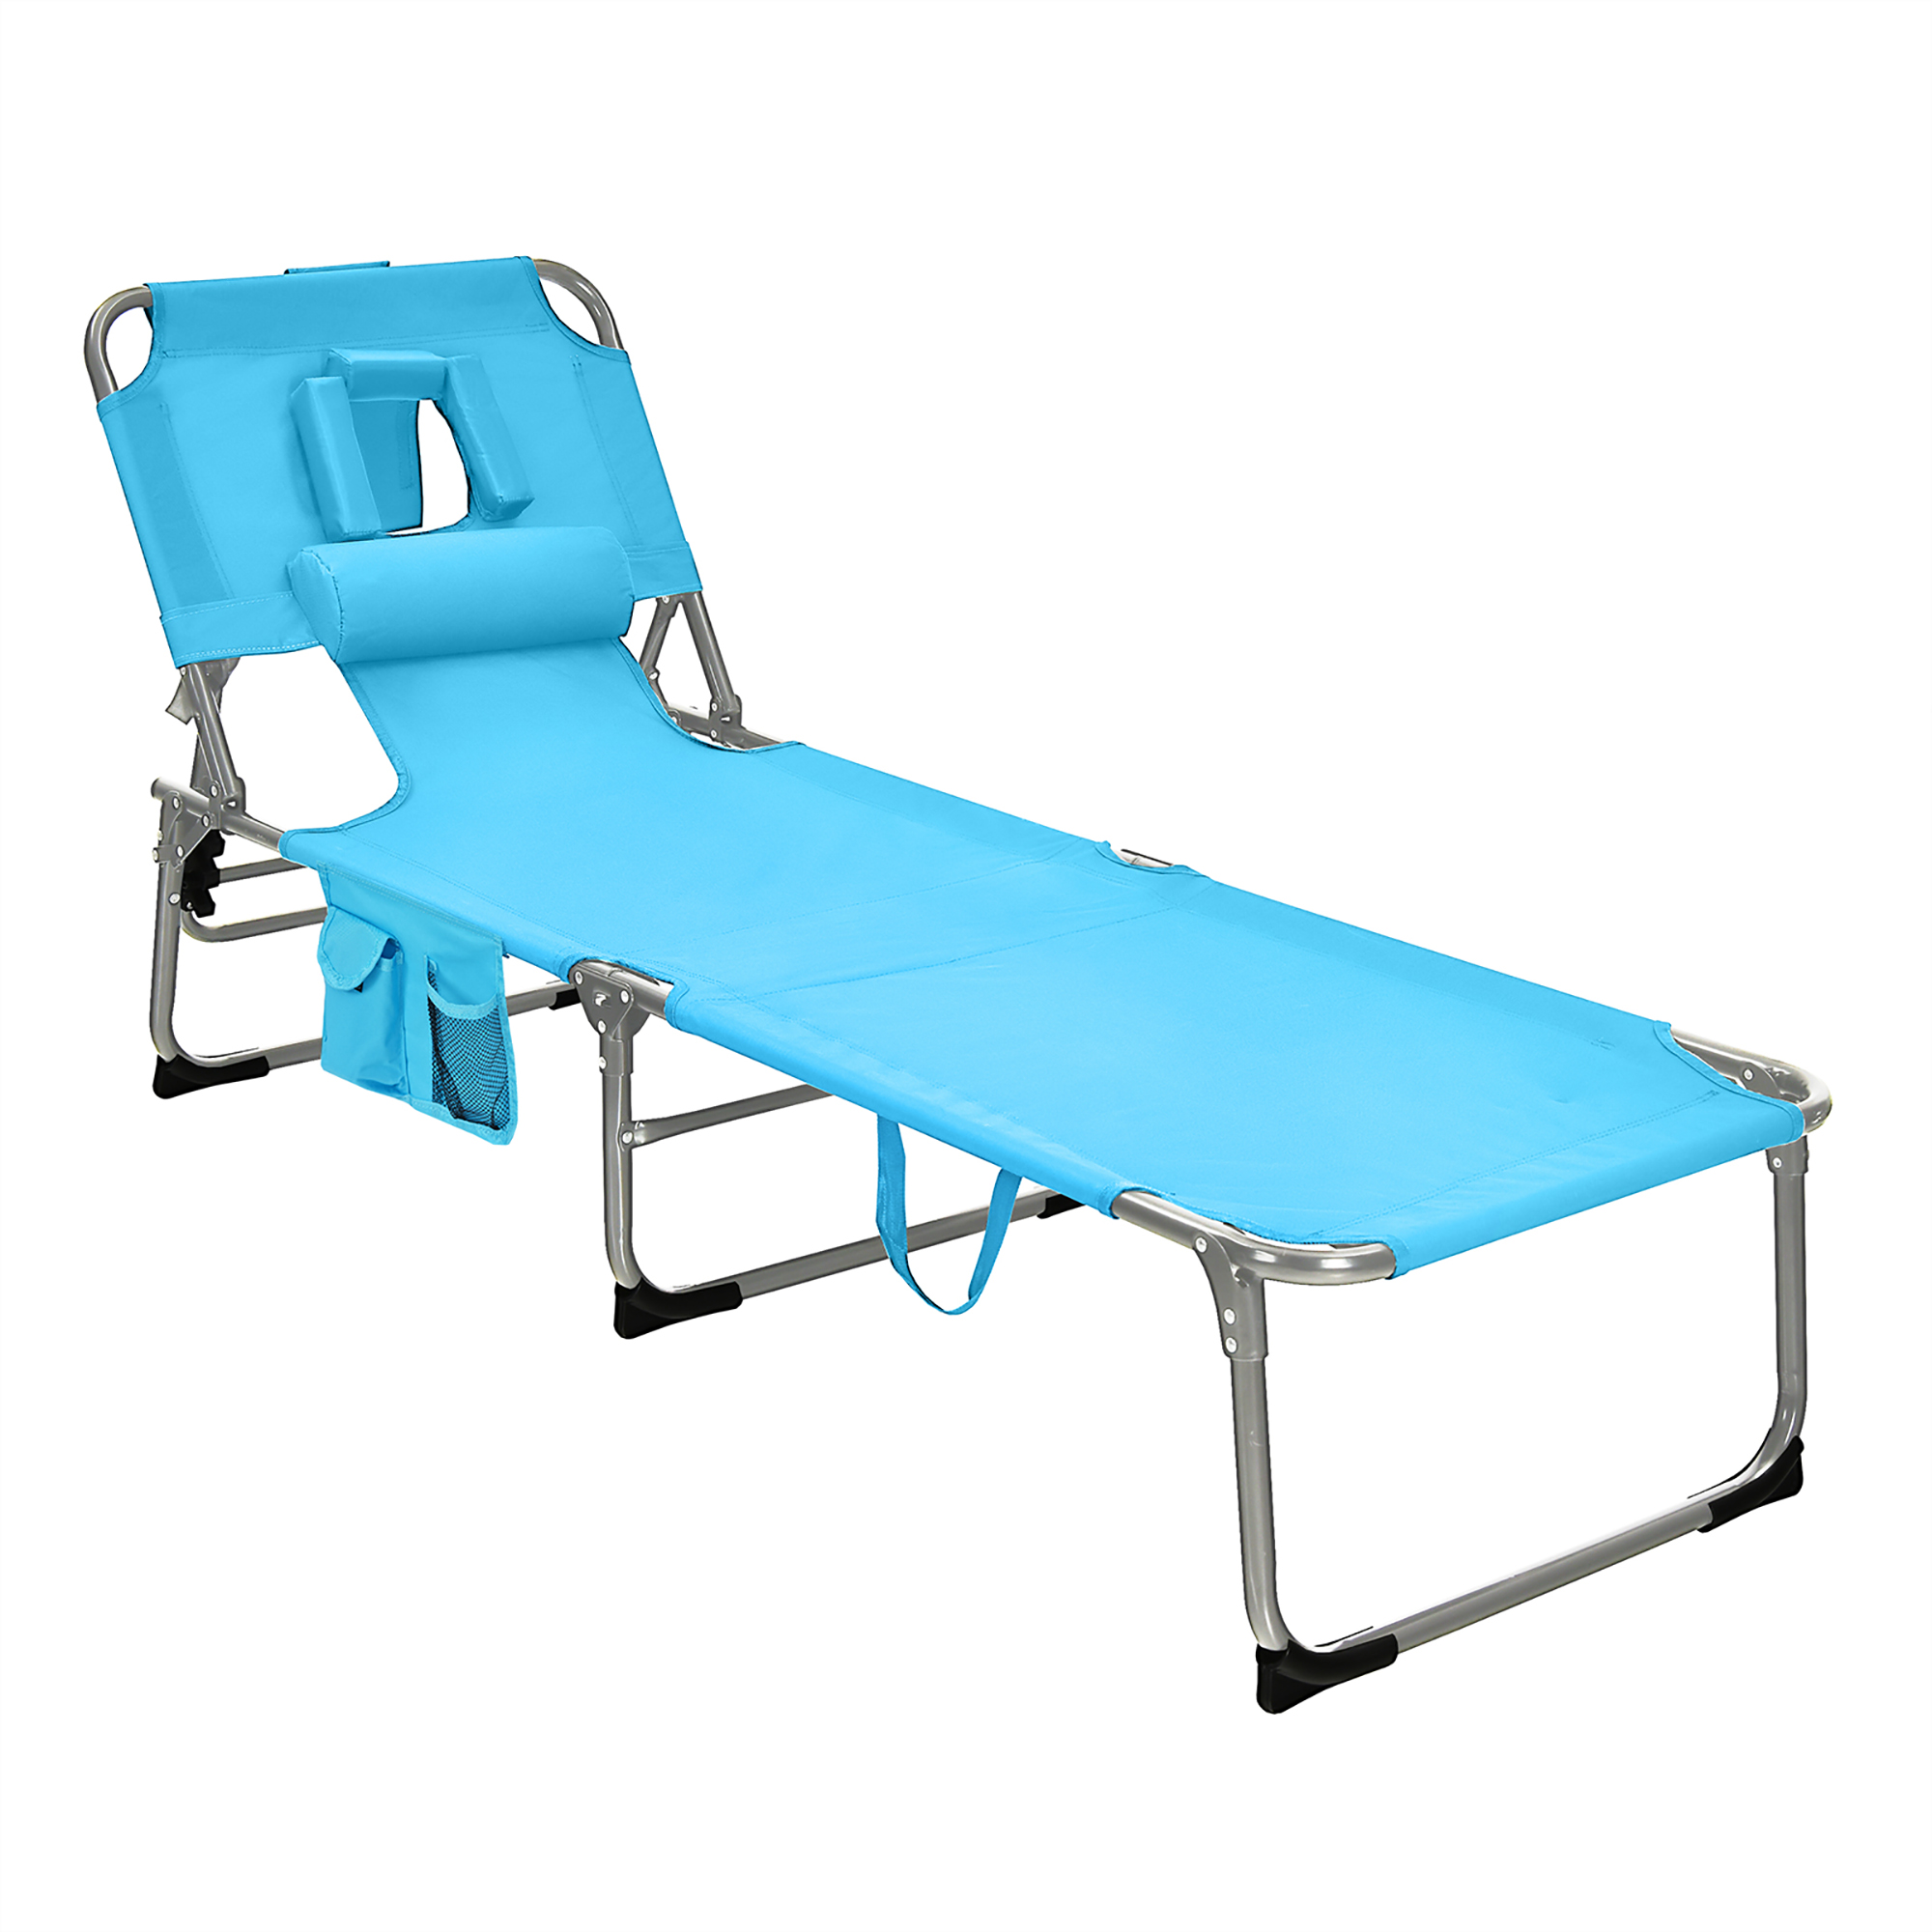 Goplus Outdoor Beach Lounge Chair Folding Chaise Lounge with Pillow Turquoise - image 2 of 8